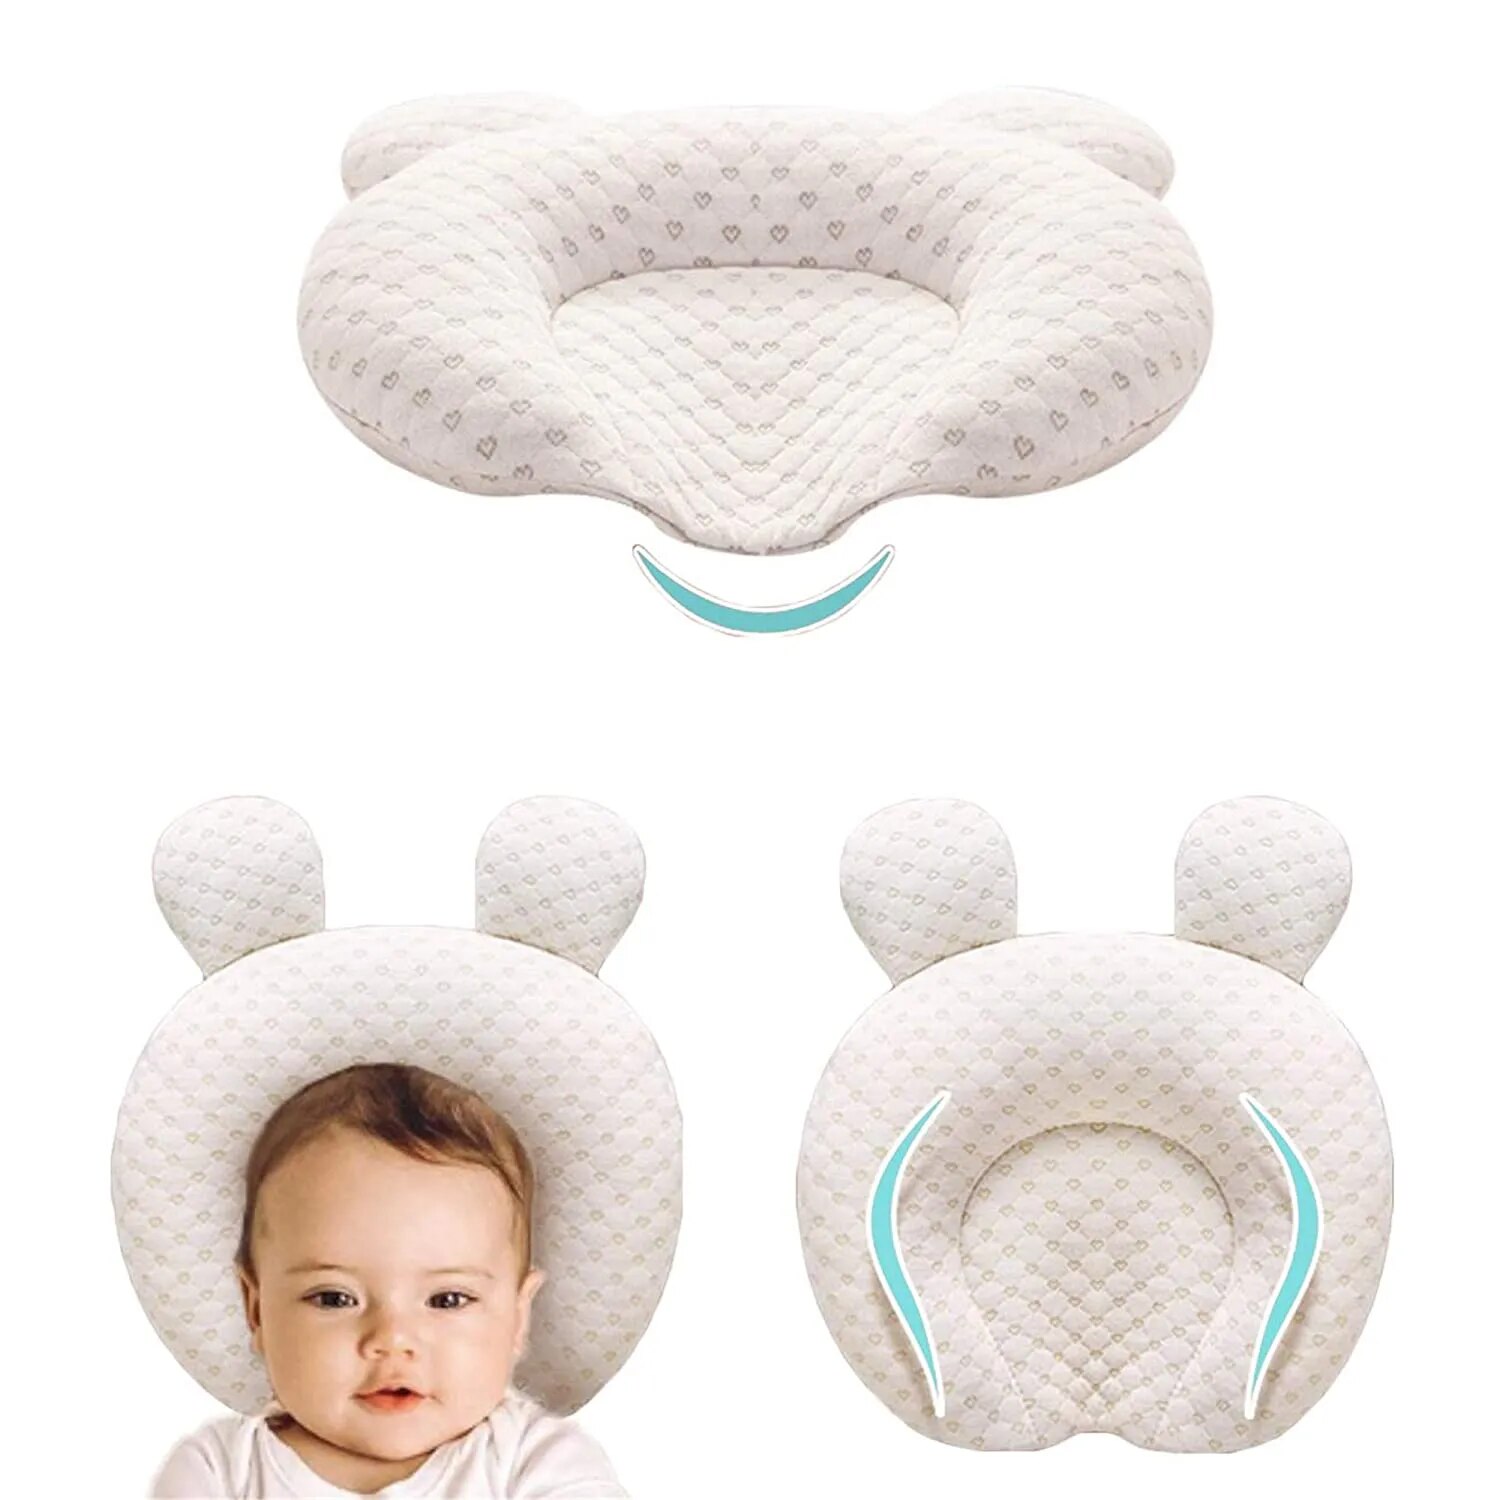 Baby Pillow Head Protector Cotton Pillow Newborn Protective Pillows Infant Sleeping Cushion for 0-1 